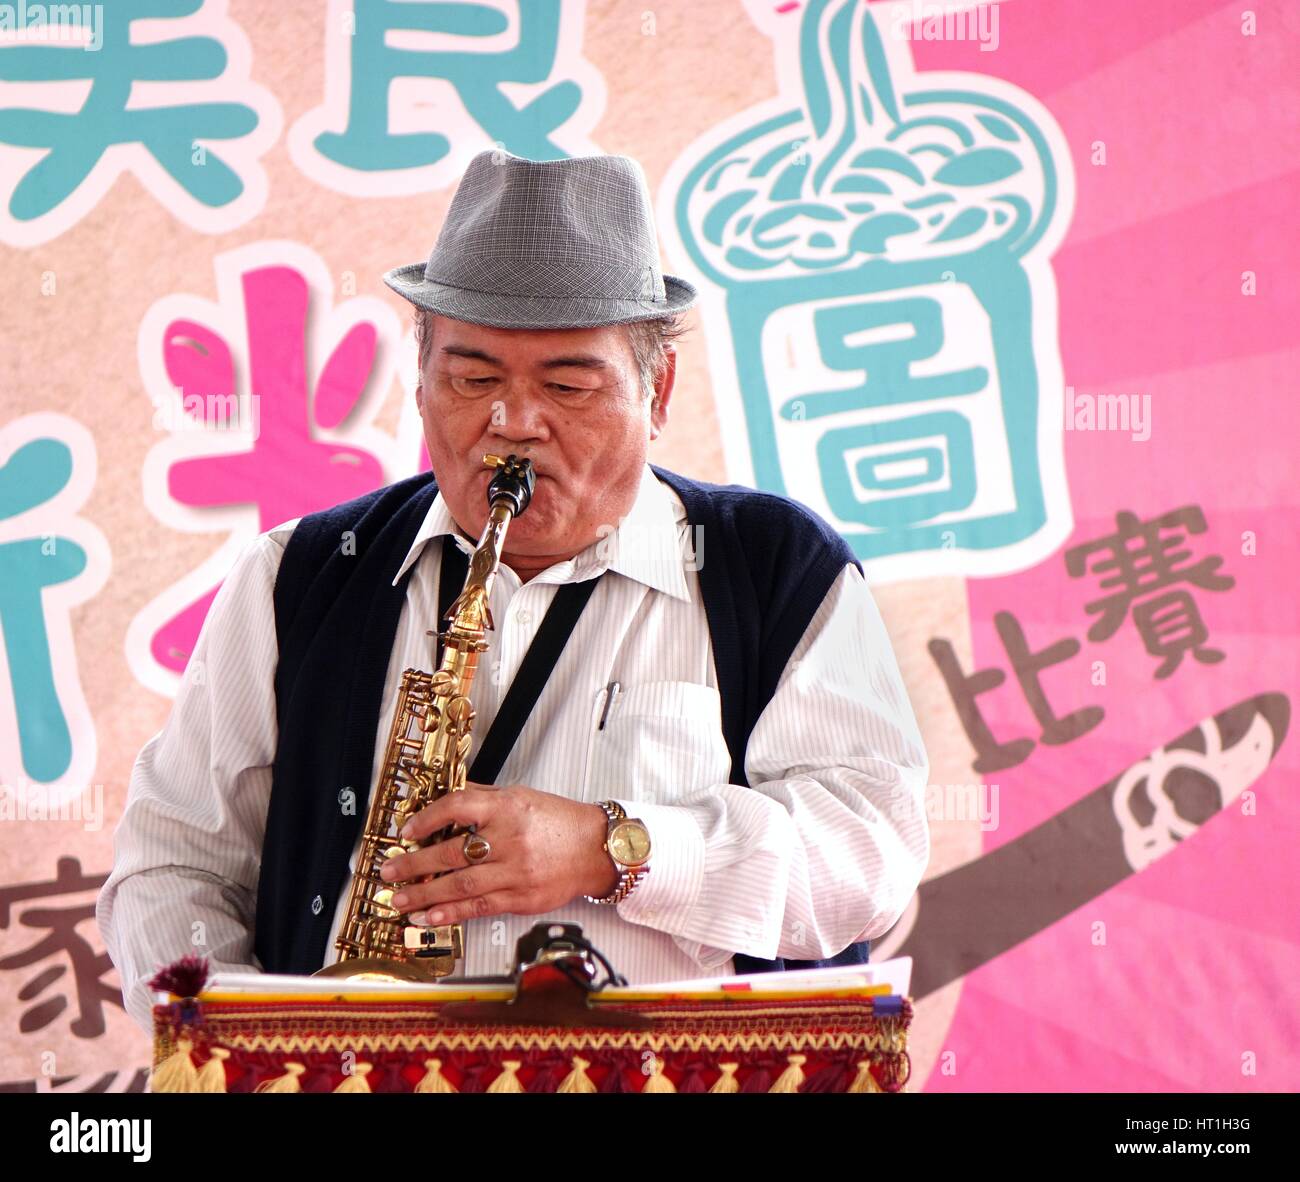 KAOHSIUNG, TAIWAN -- NOVEMBER 28, 2015: An unidentified local musician plays the saxophone at the 2015 Hakka Food Festival, which is a yearly public o Stock Photo